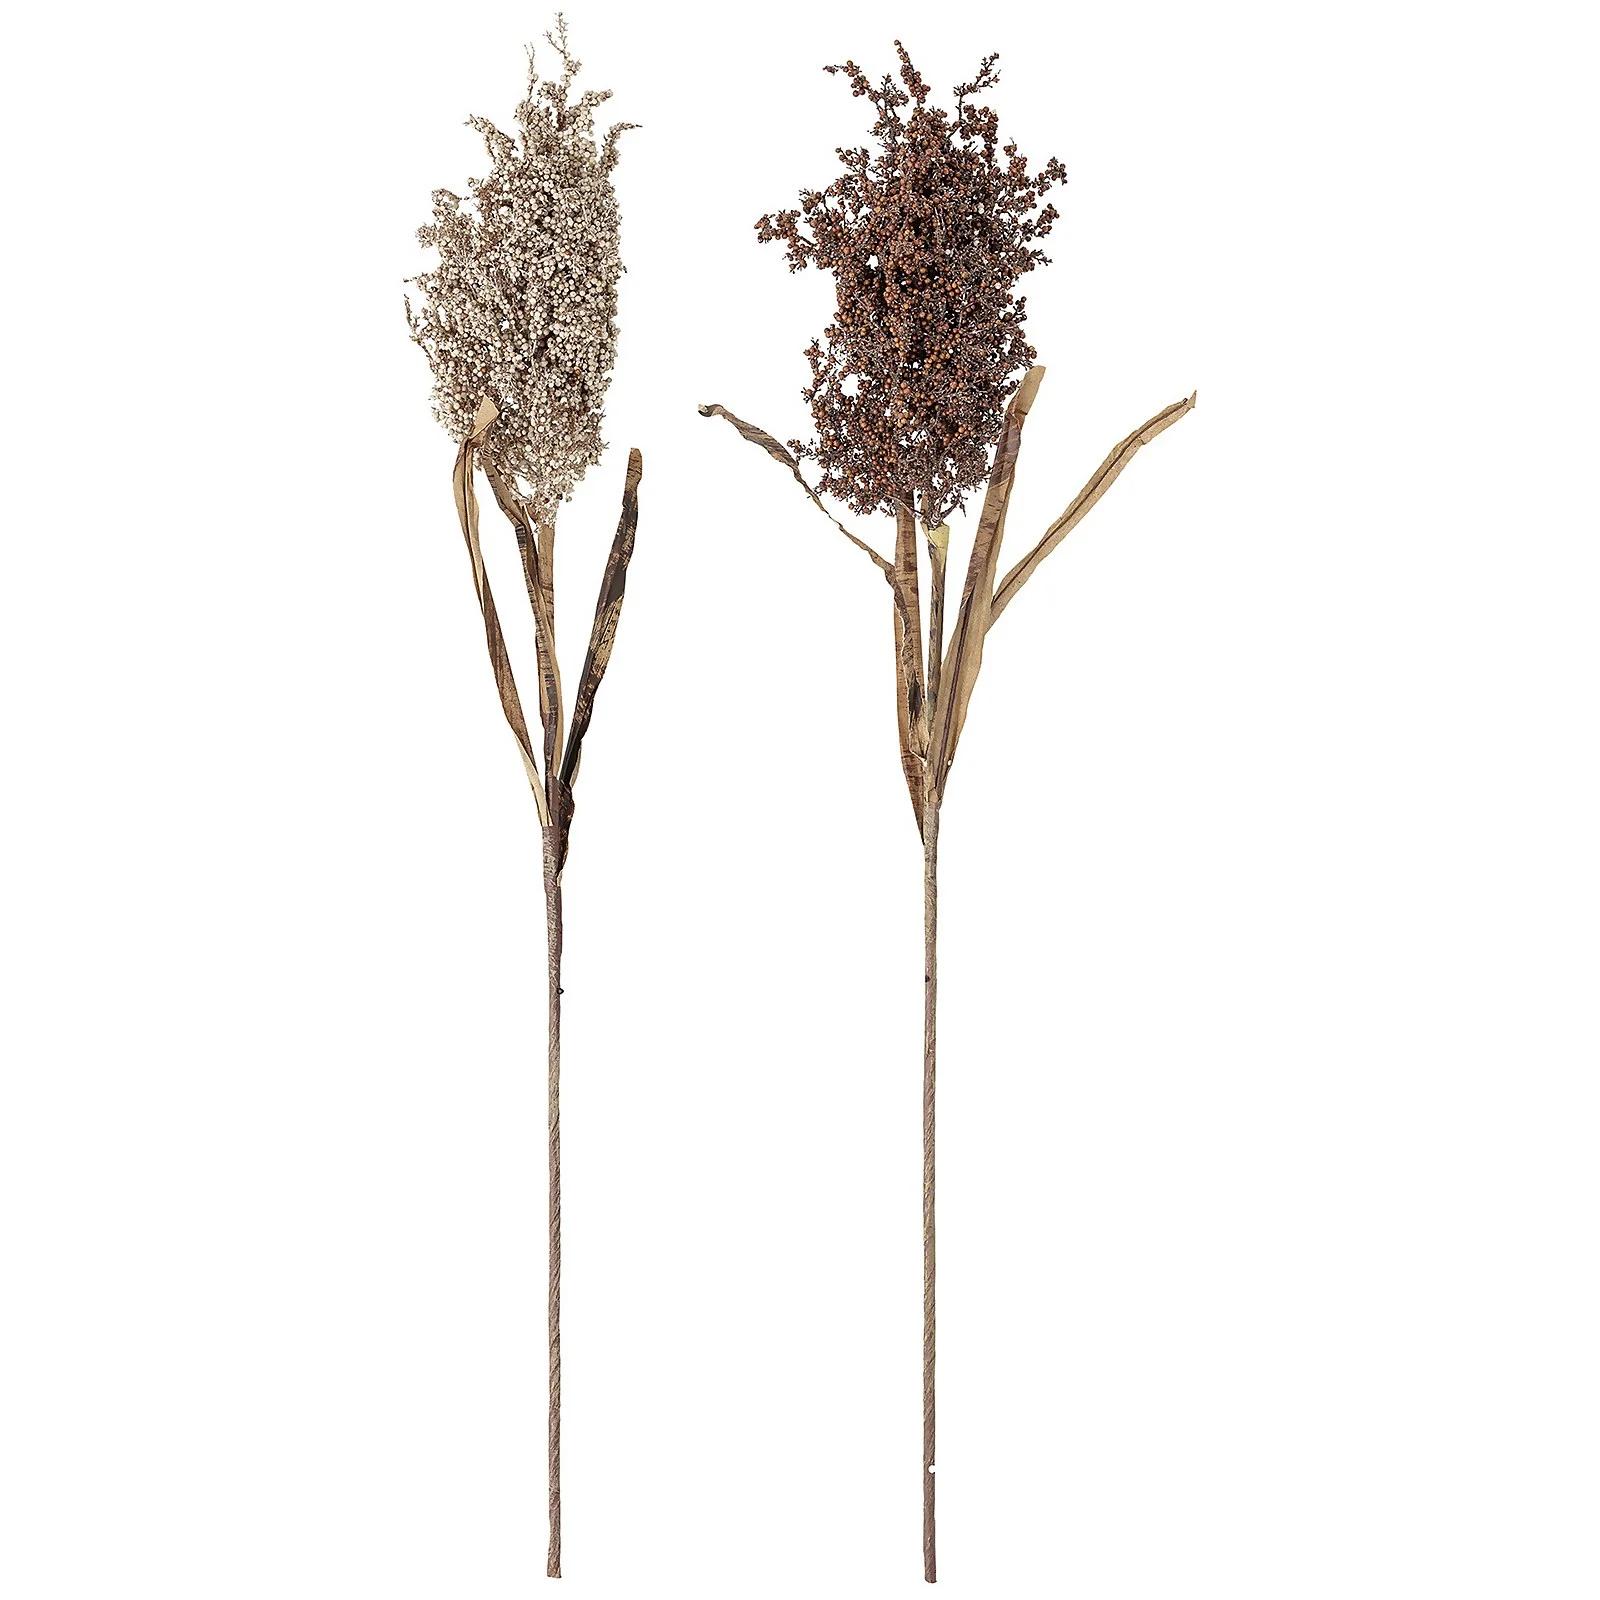 Bloomingville Faux Dried Flower - Set of 2 - Assiba Image 1